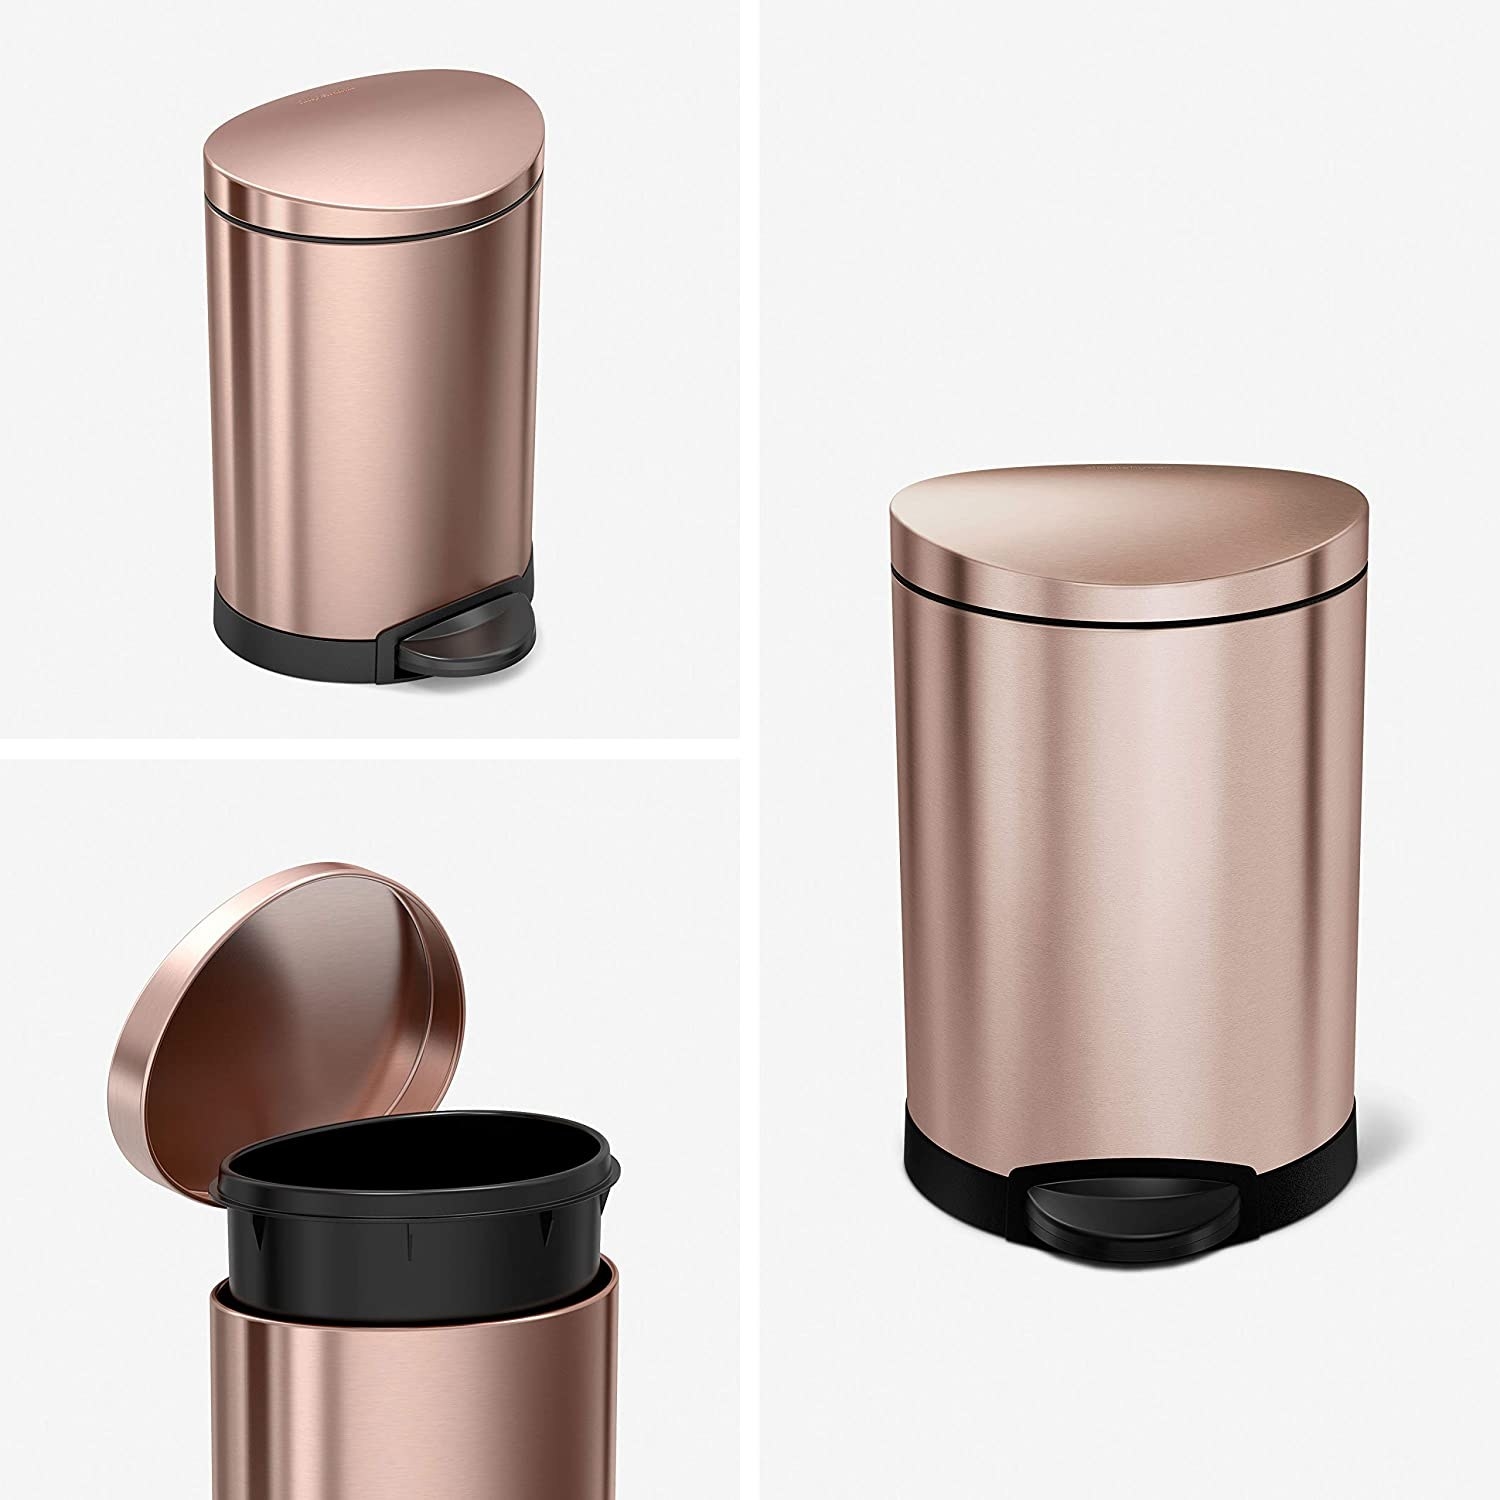 Three pictures of the rose gold simplehuman Bathroom Step Trash Can; one from the side, one from the front, and one revealing the inner liner